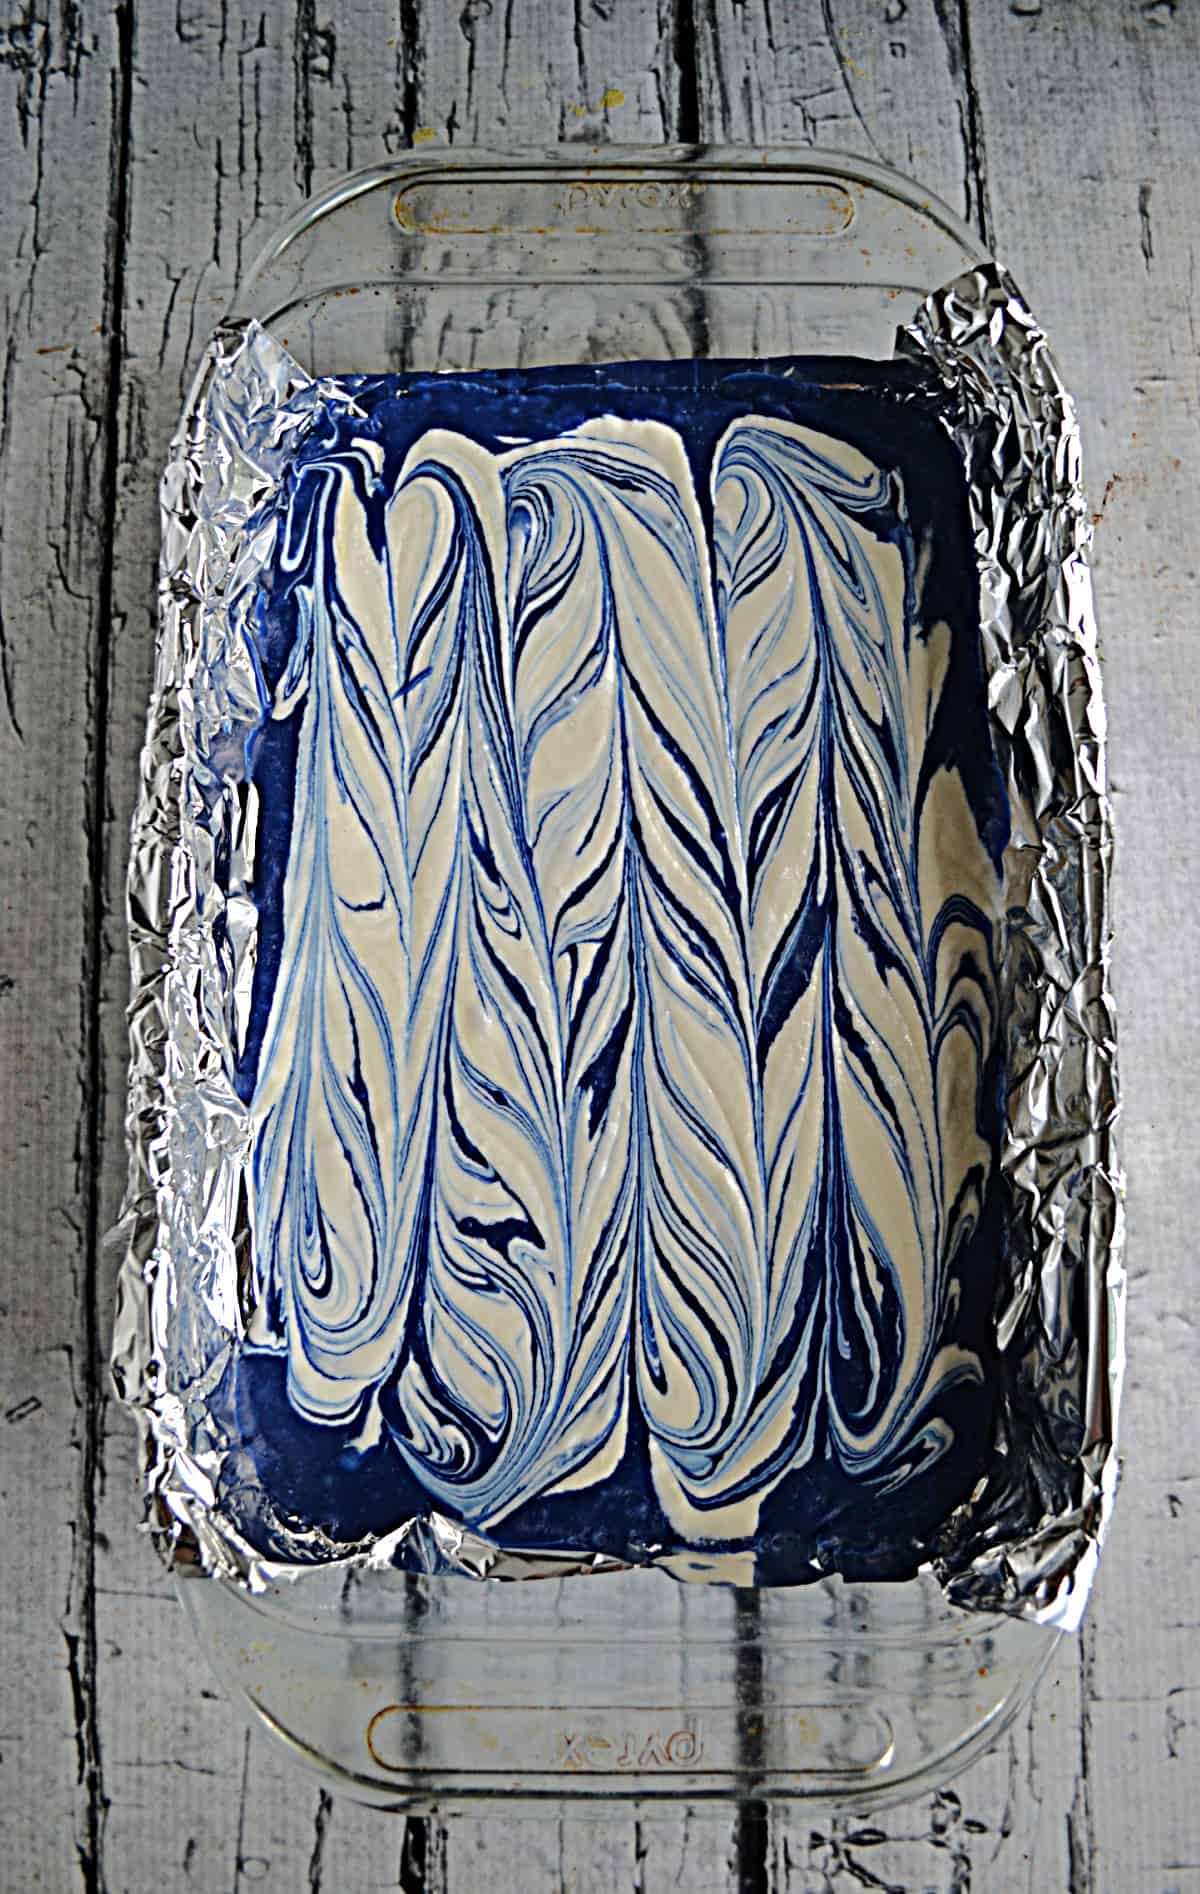 A pan of white and blue fudge swirled together.